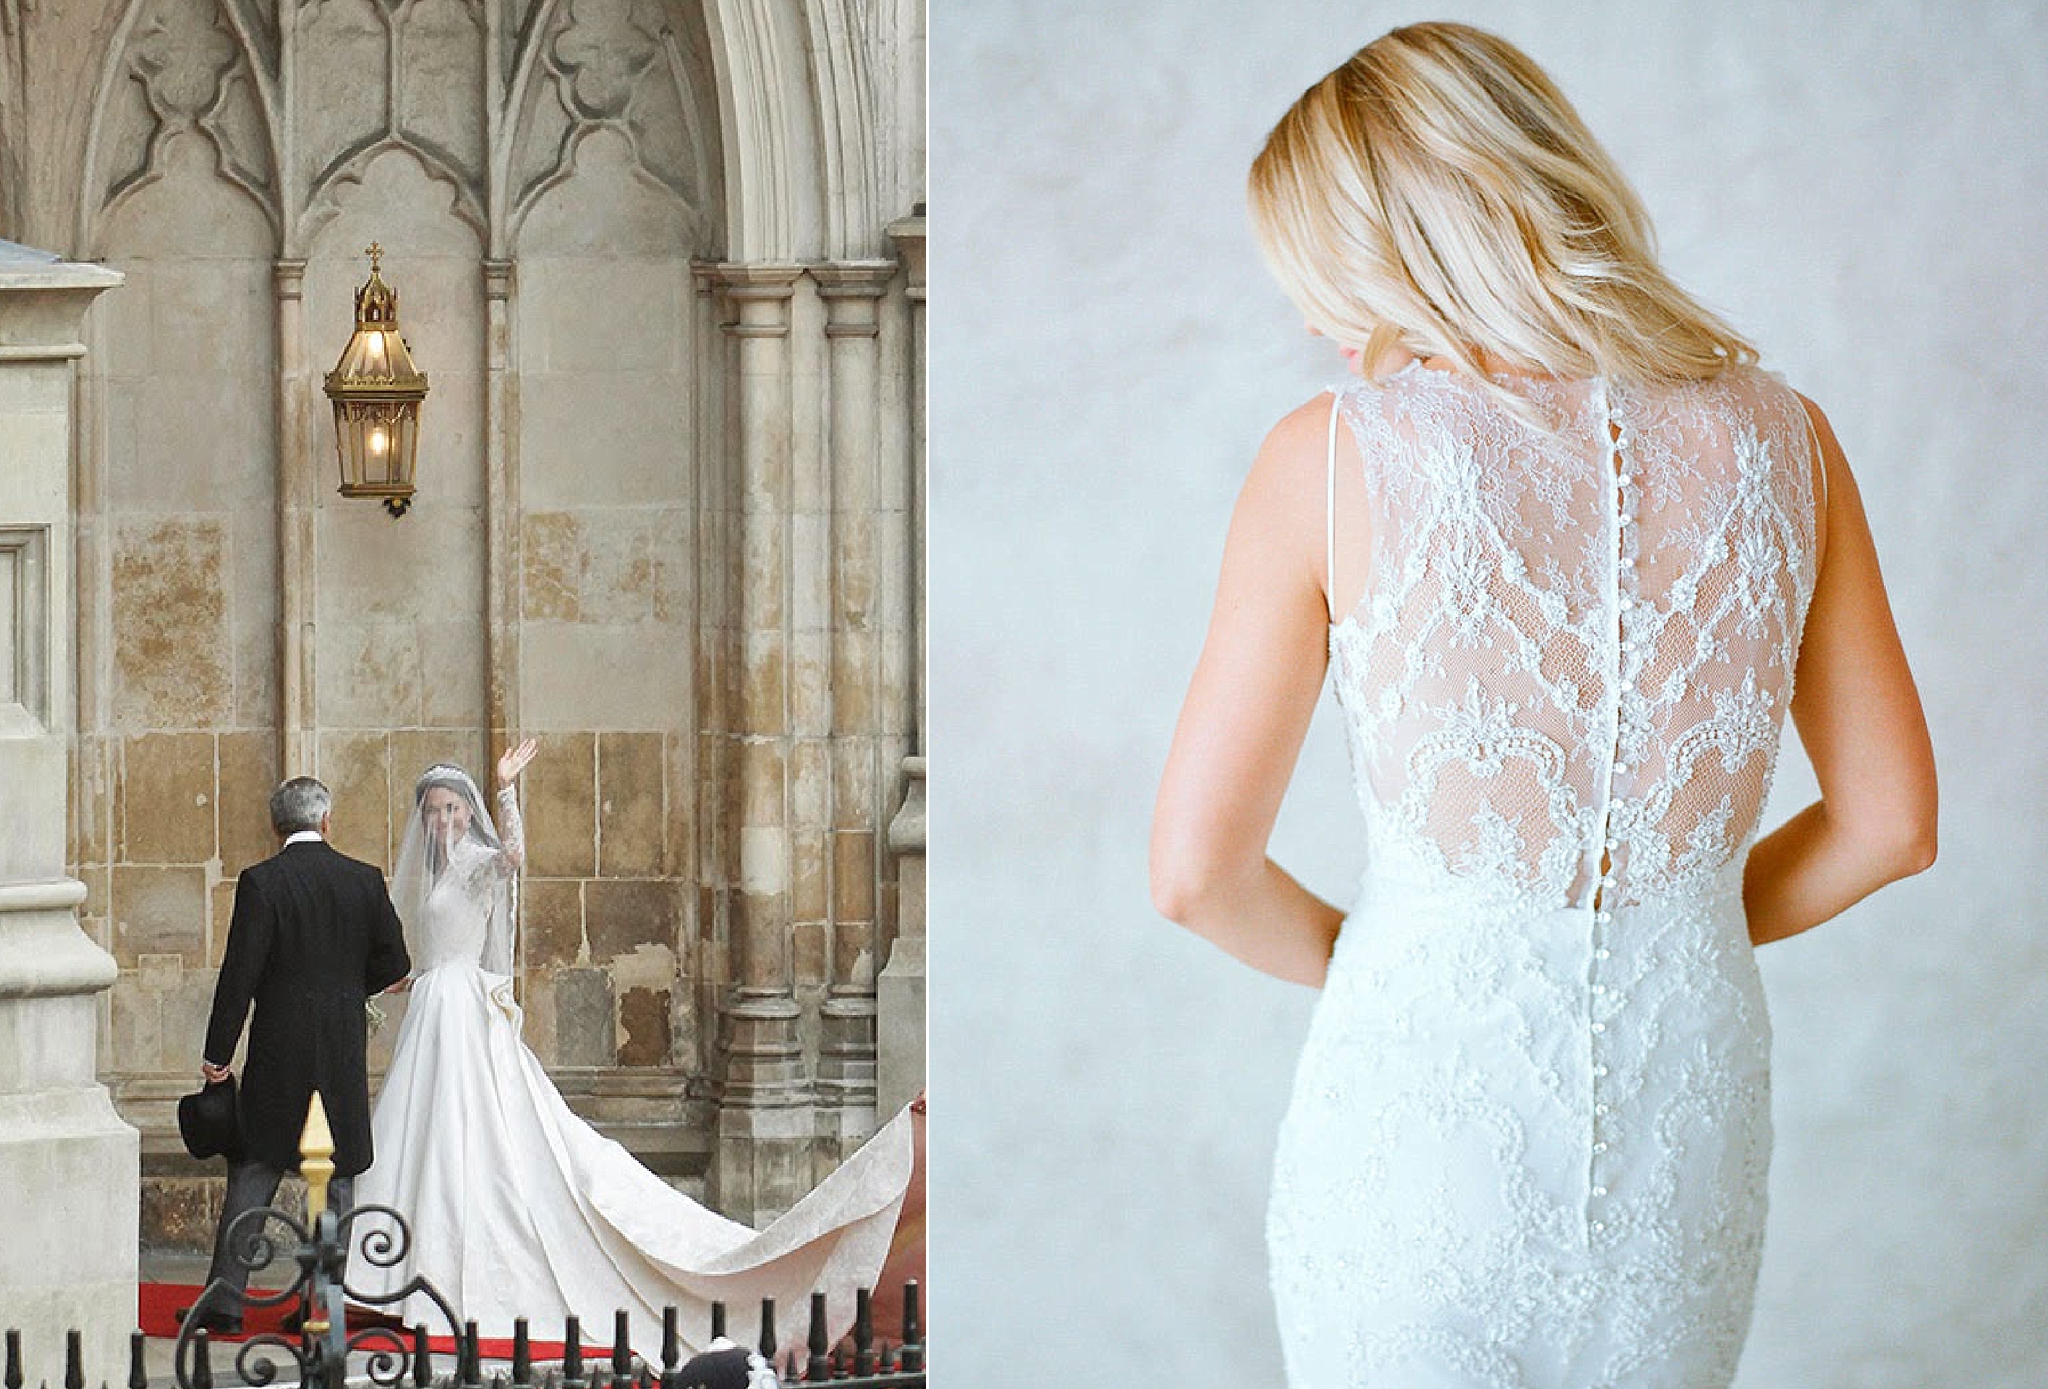 As a Washington, DC wedding photographer, it's safe to say that Alicia has seen her fair share of gorgeous dresses and discusses five iconic gowns.